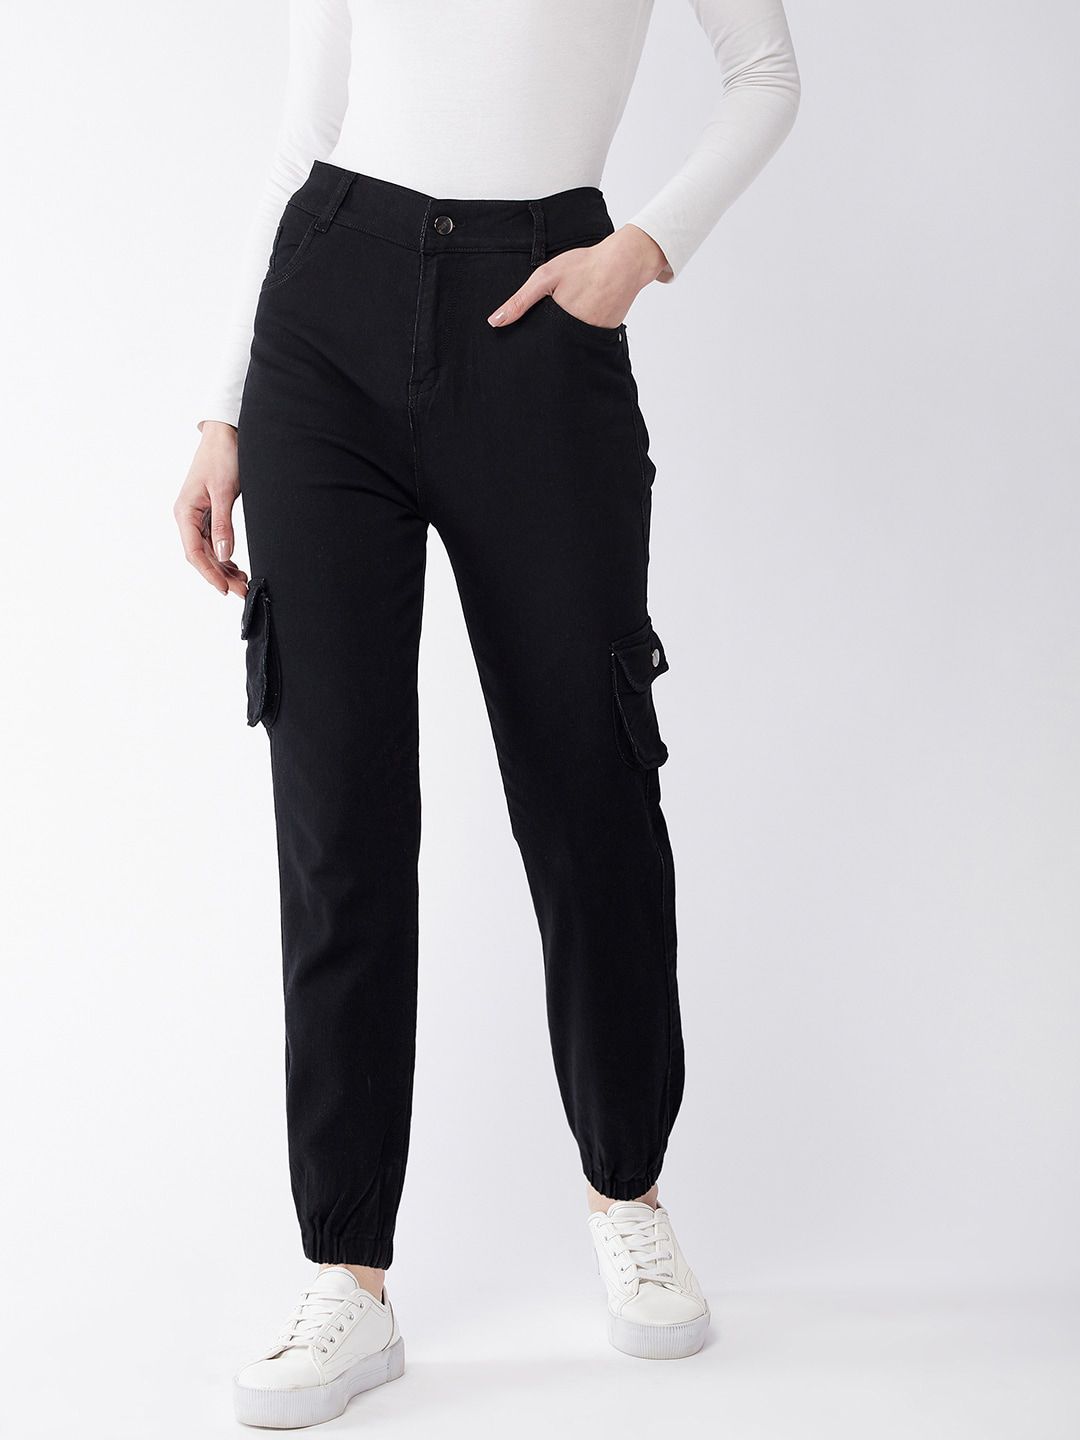 Purple Feather Women Black Jogger High-Rise Cuffed Hem Stretchable Jeans Price in India